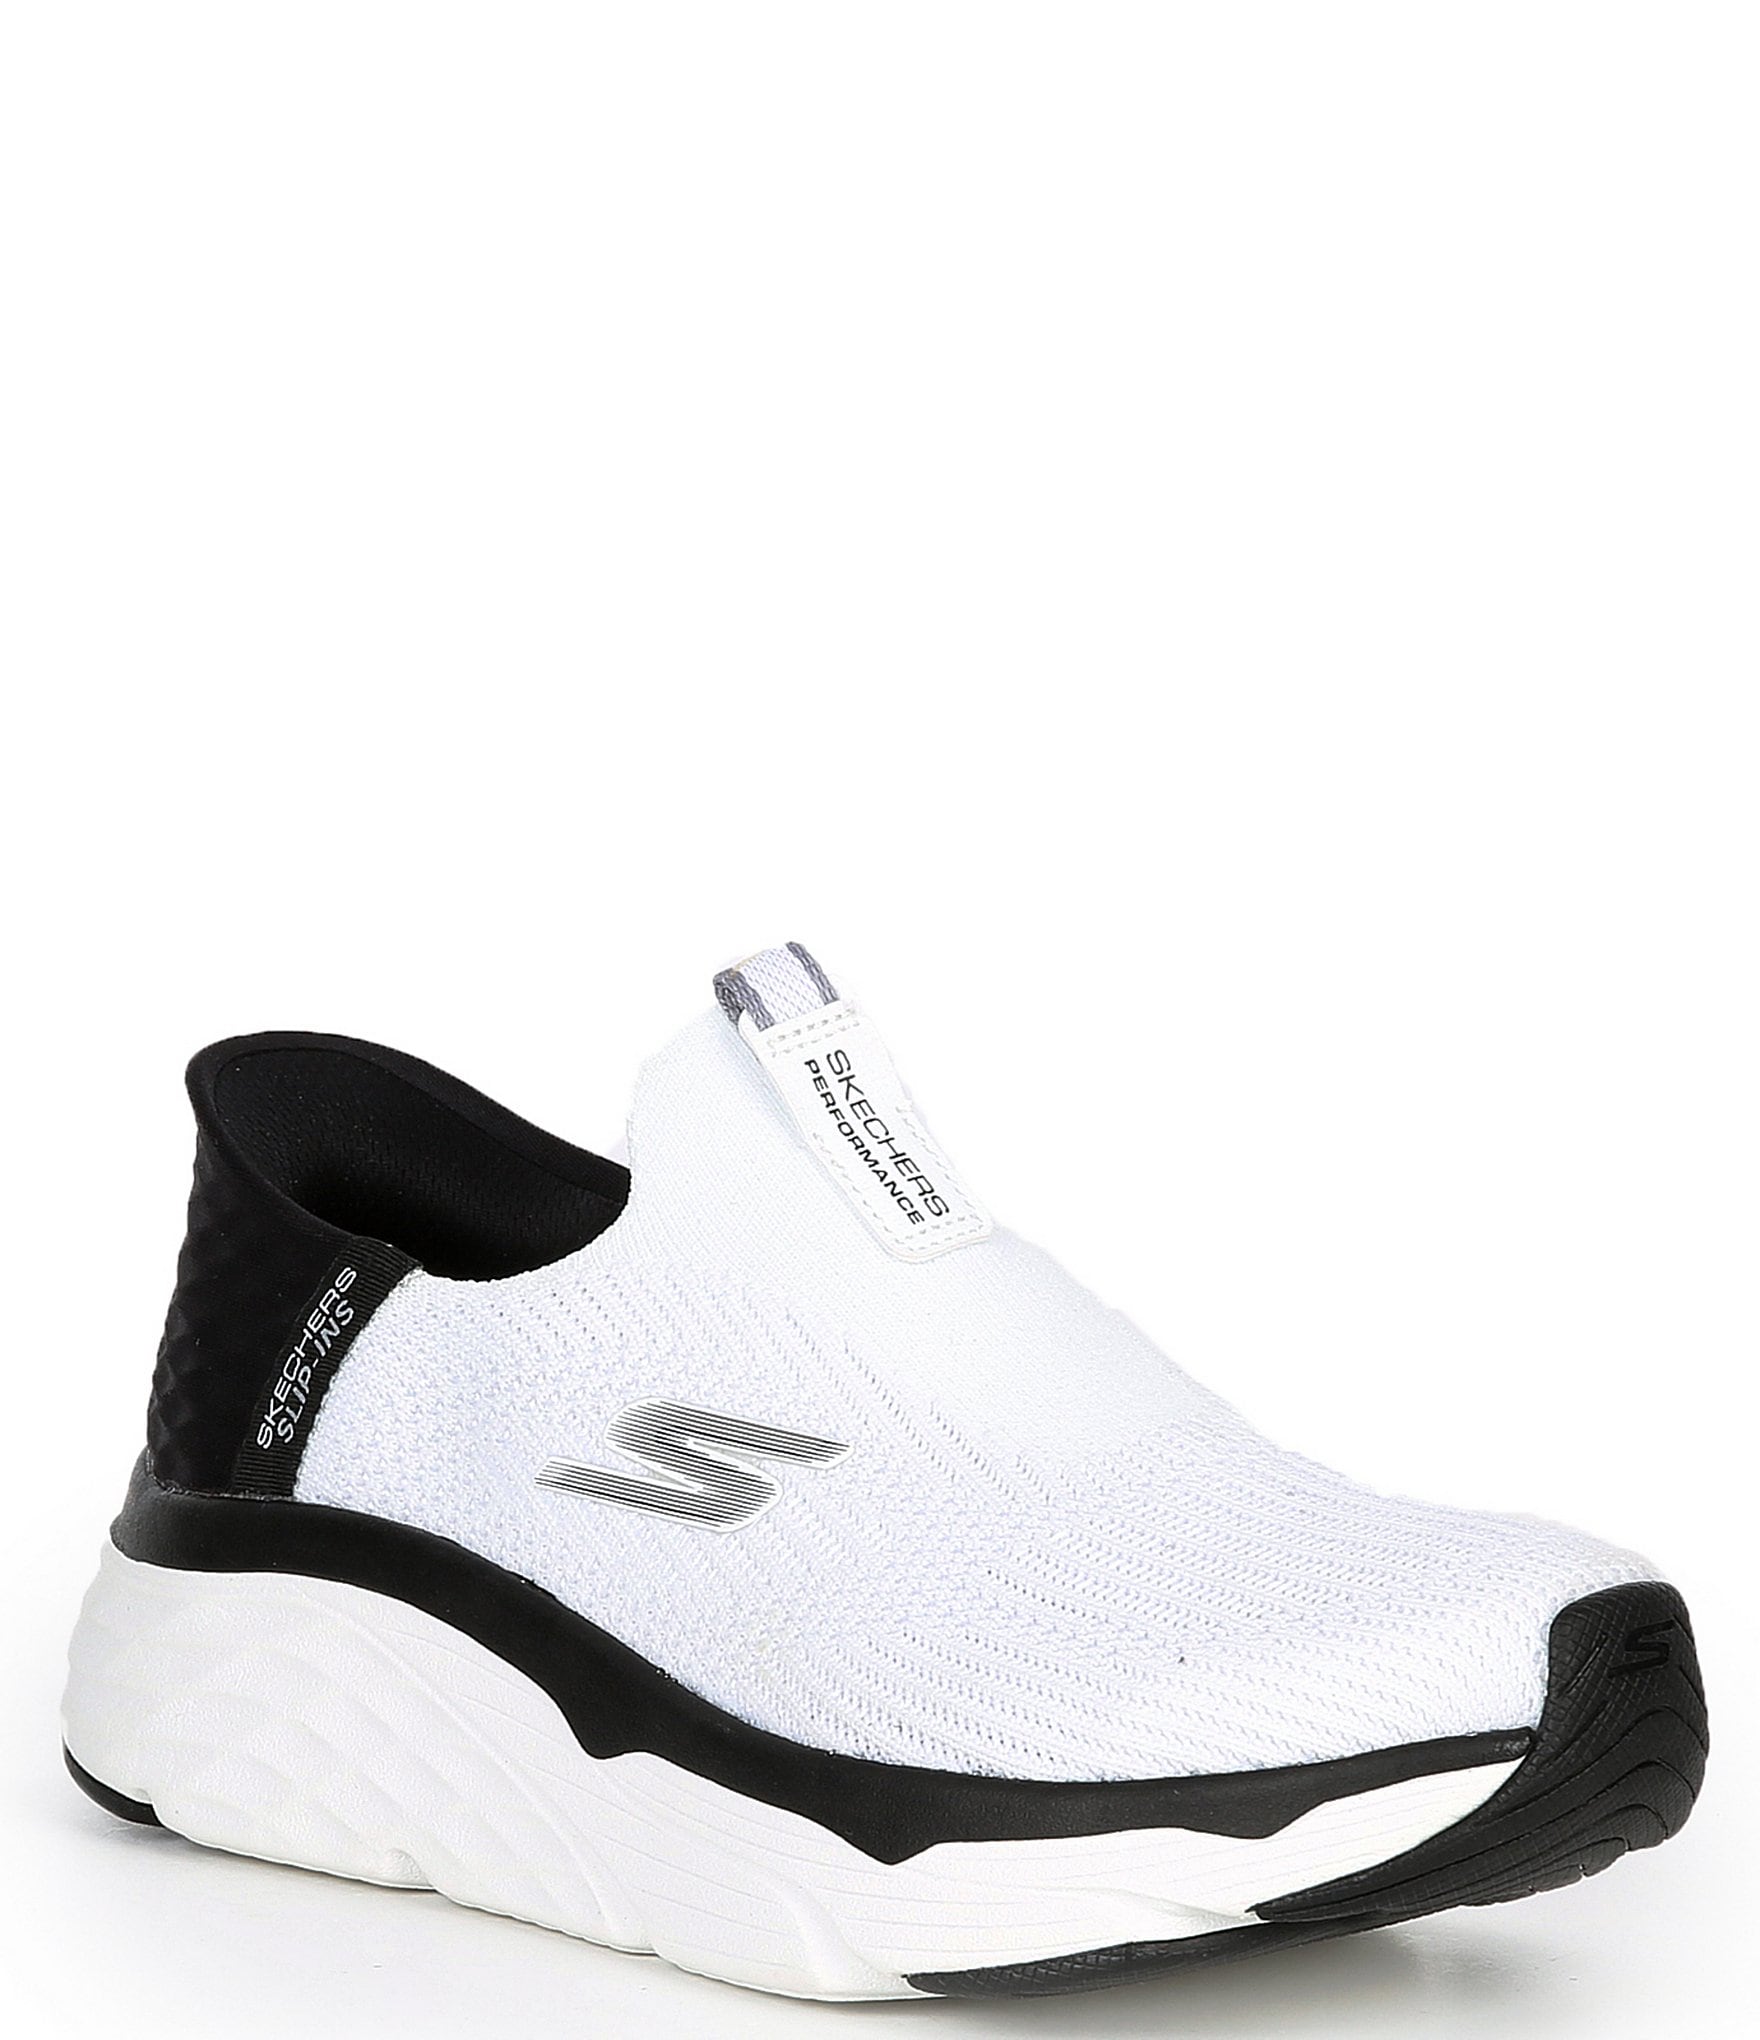 Buy Skechers Shoes Online - The Athlete's Foot